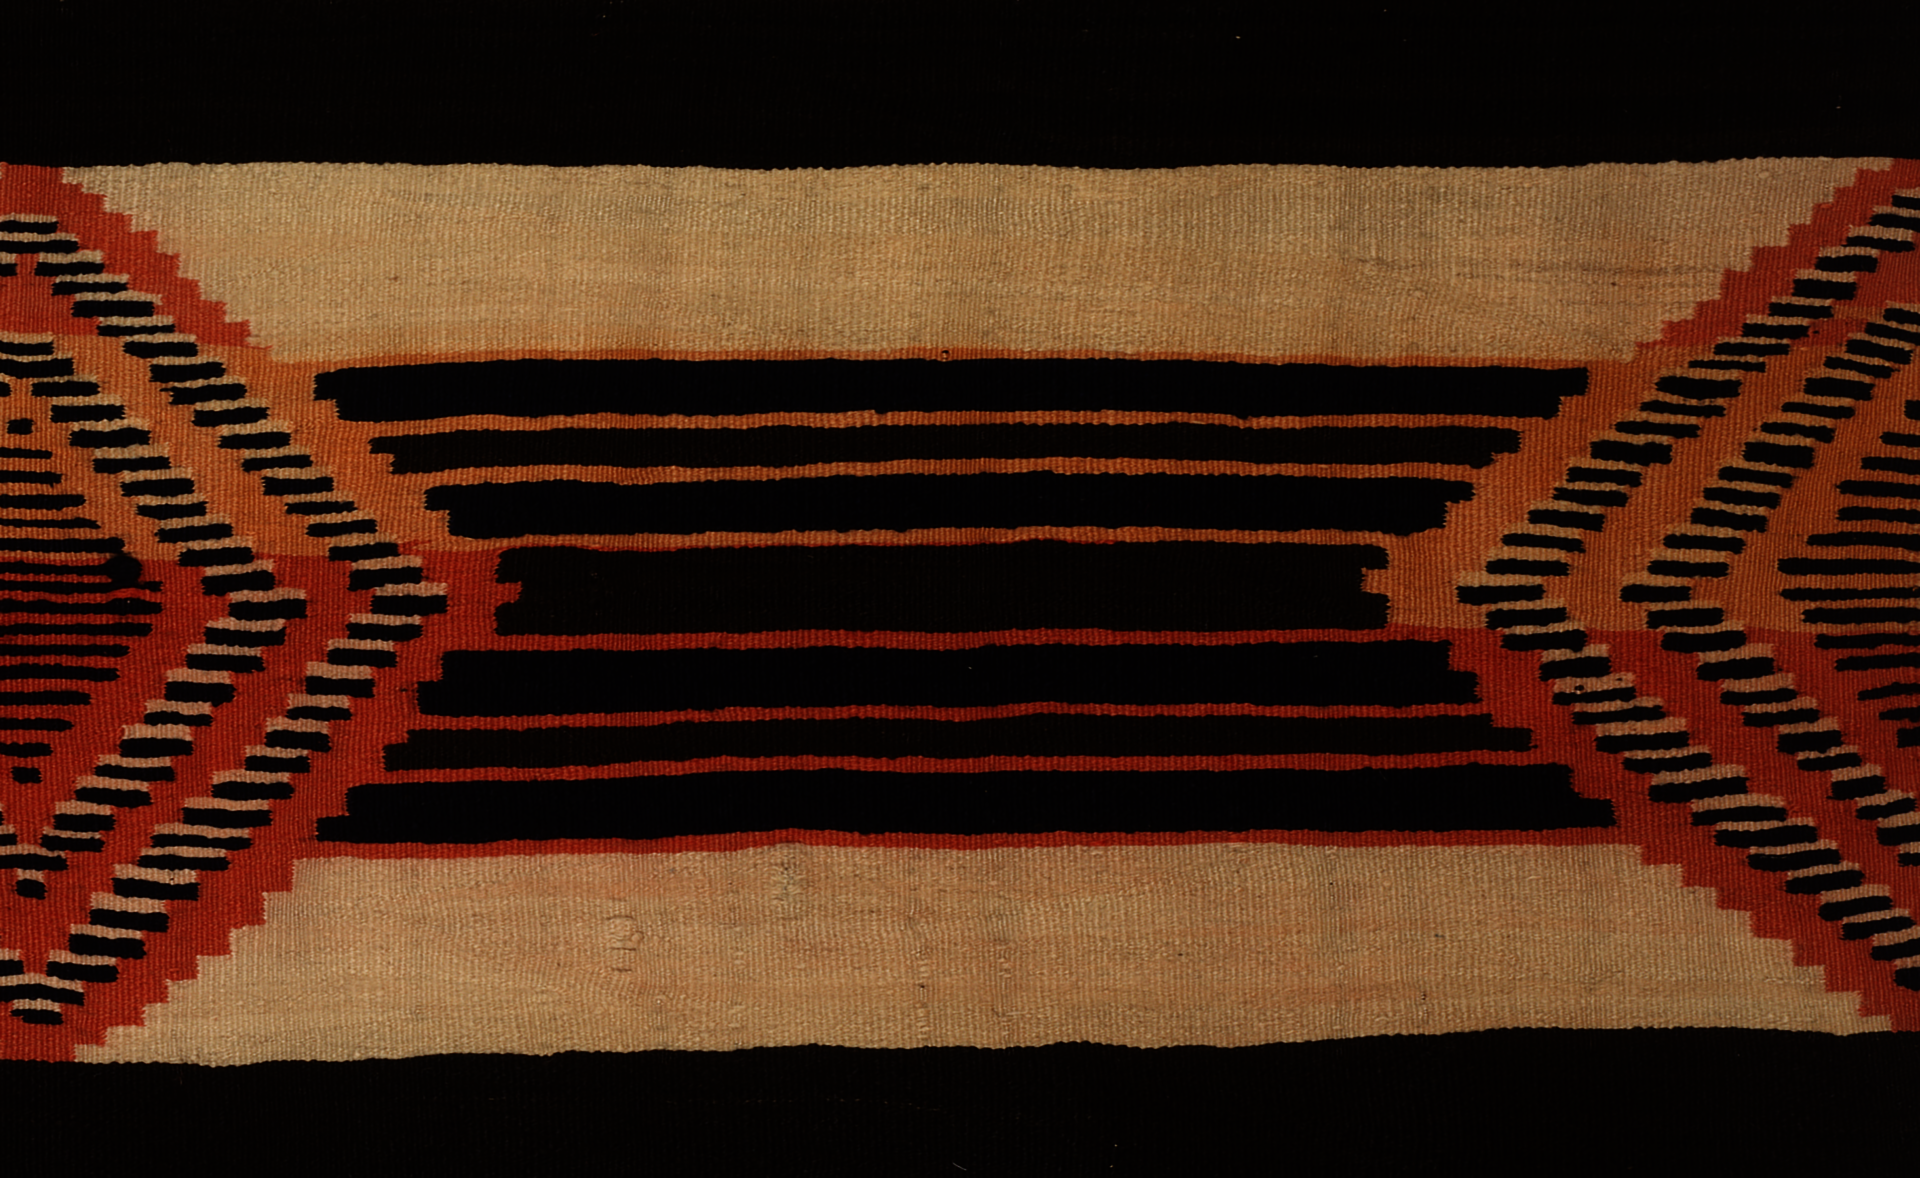 A woven textile with black and orange stripes of various sizes and shapes on a tan colored background. 